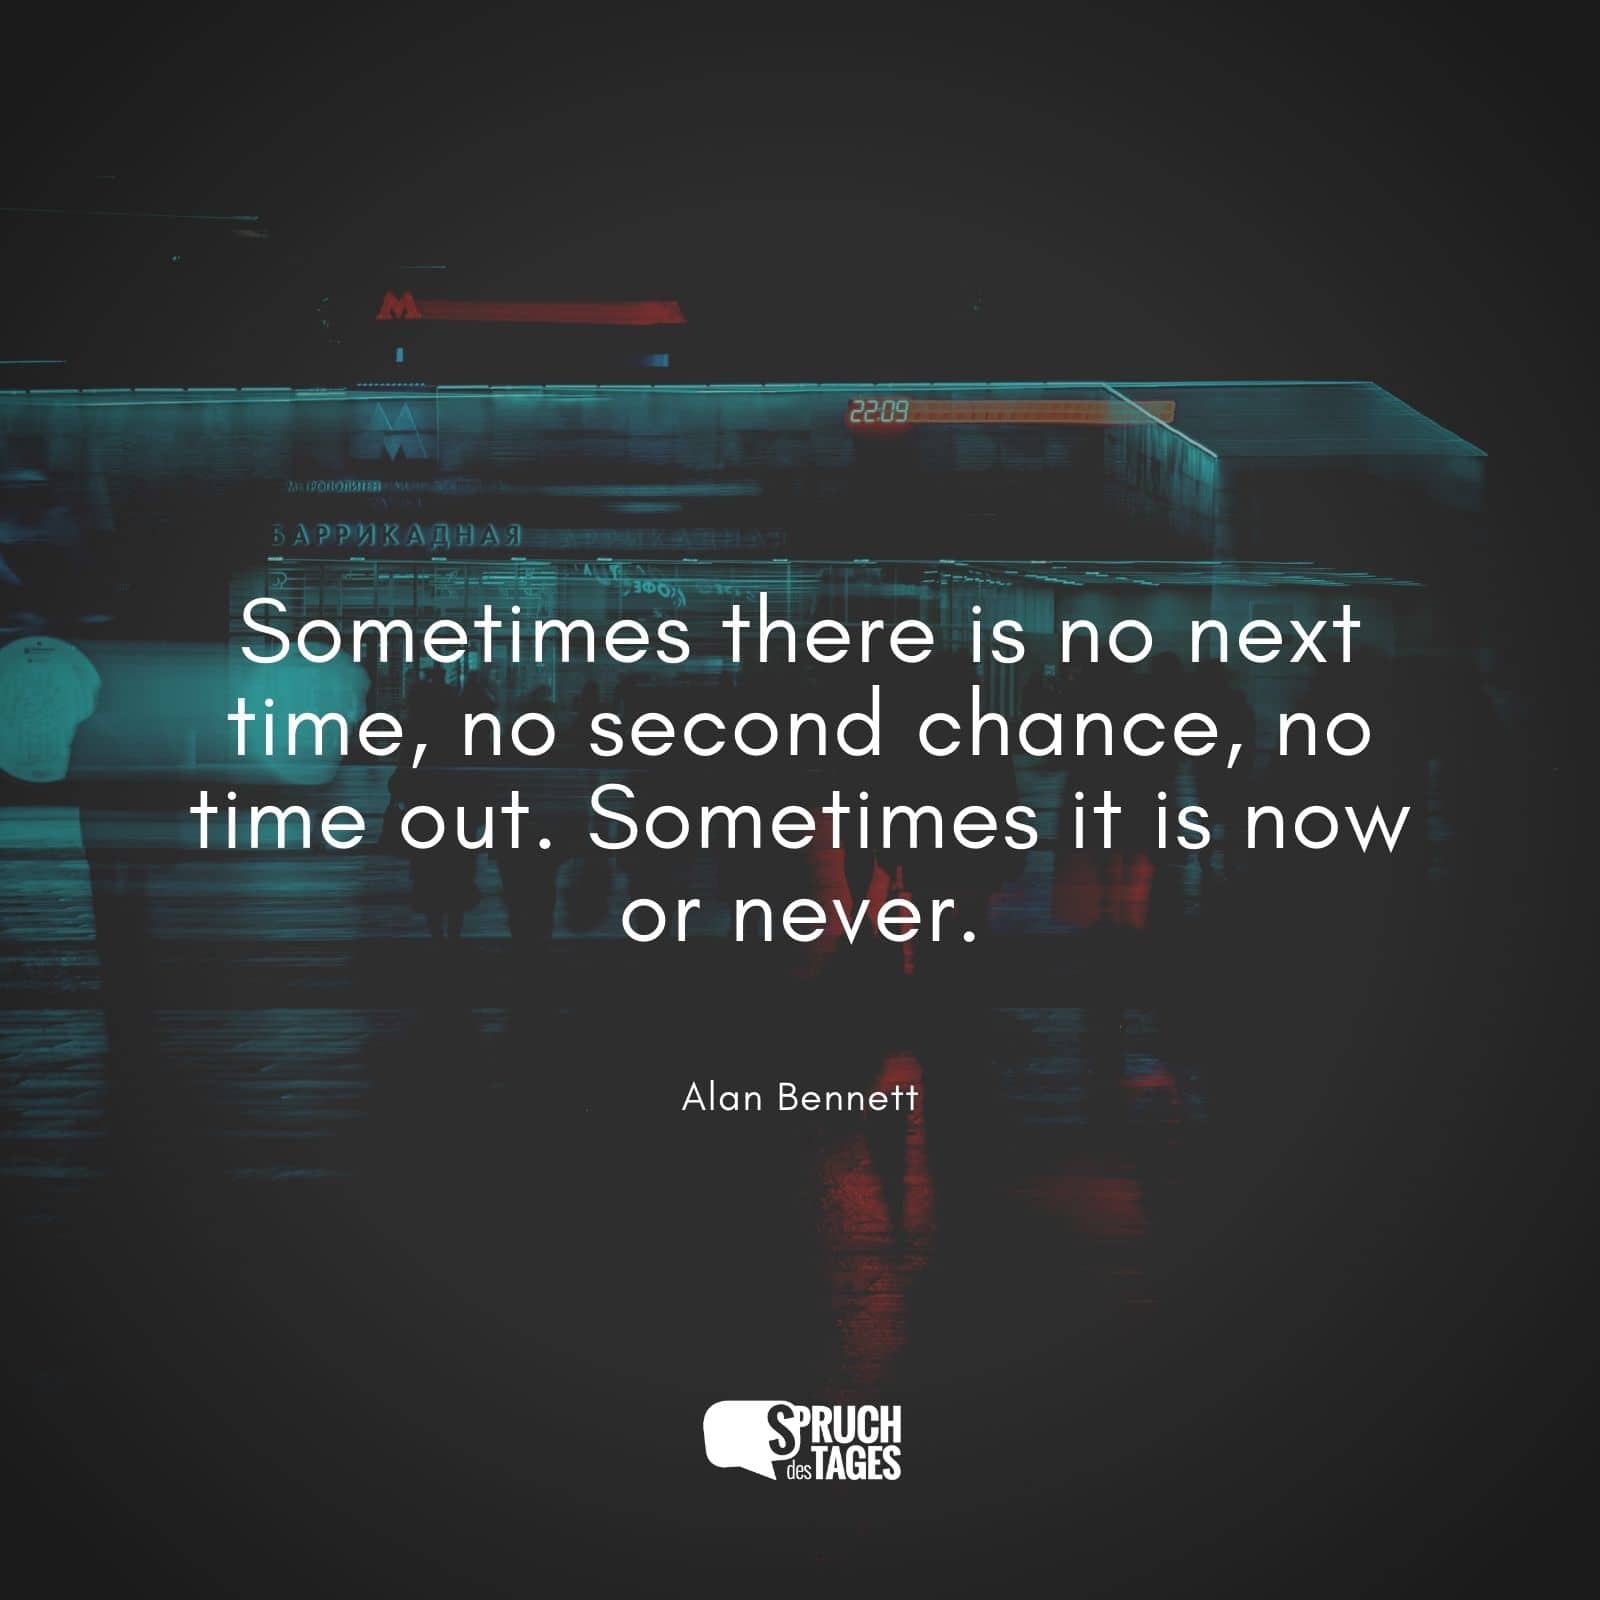 Sometimes there is no next time, no second chance, no time out. Sometimes it is now or never.